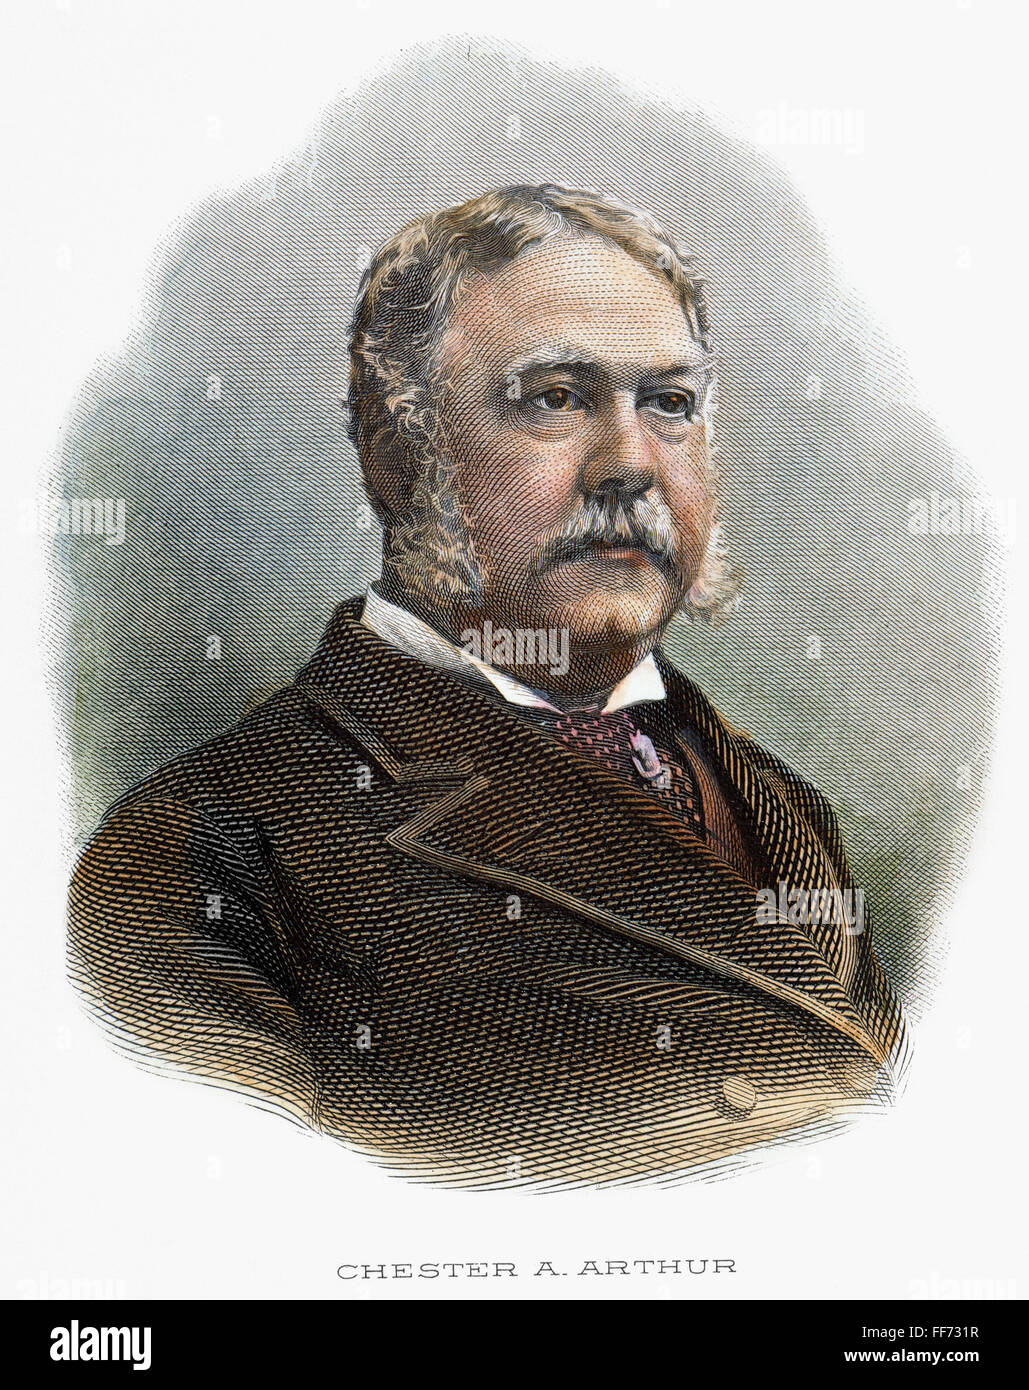 CHESTER A. ARTHUR /n(1830-1886). Steel engraving. Stock Photo